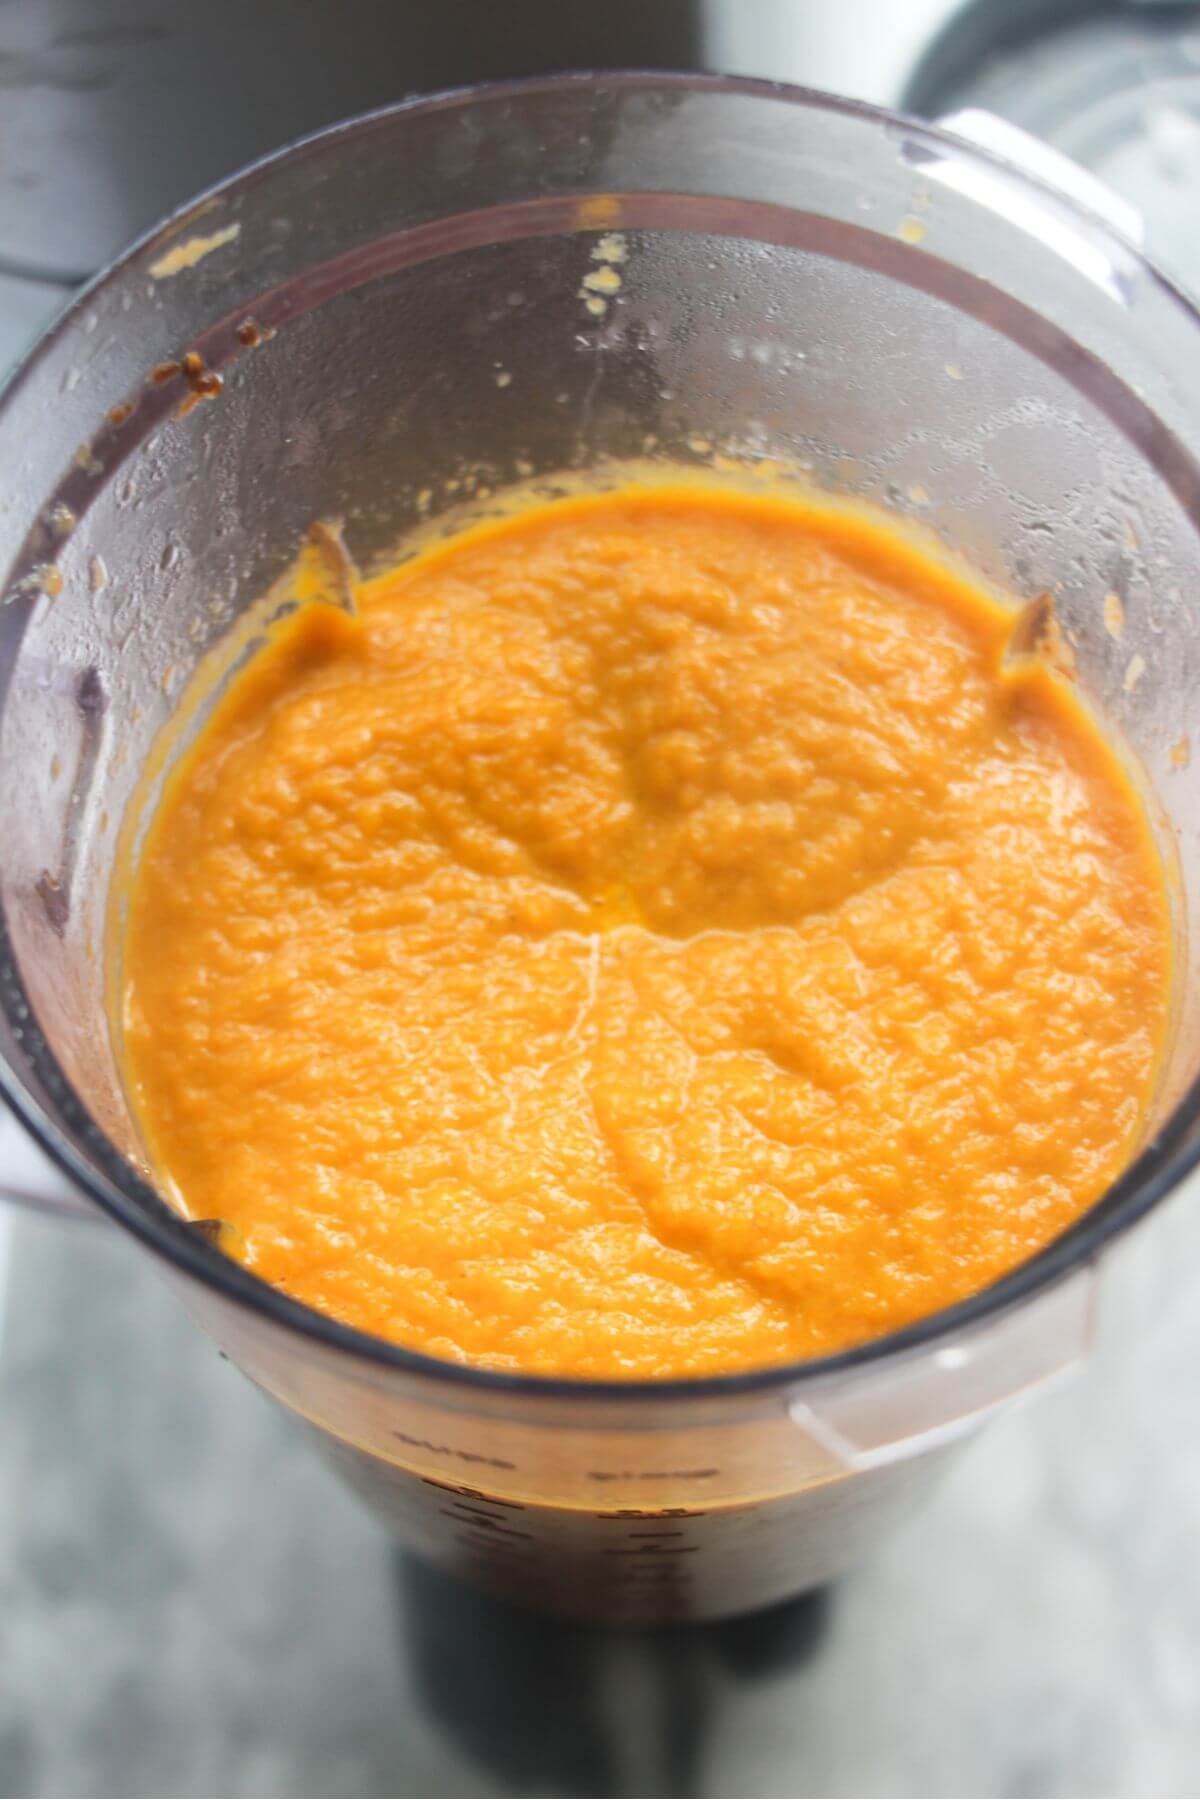 Blended orange carrot soup in a blender, looking down from above.